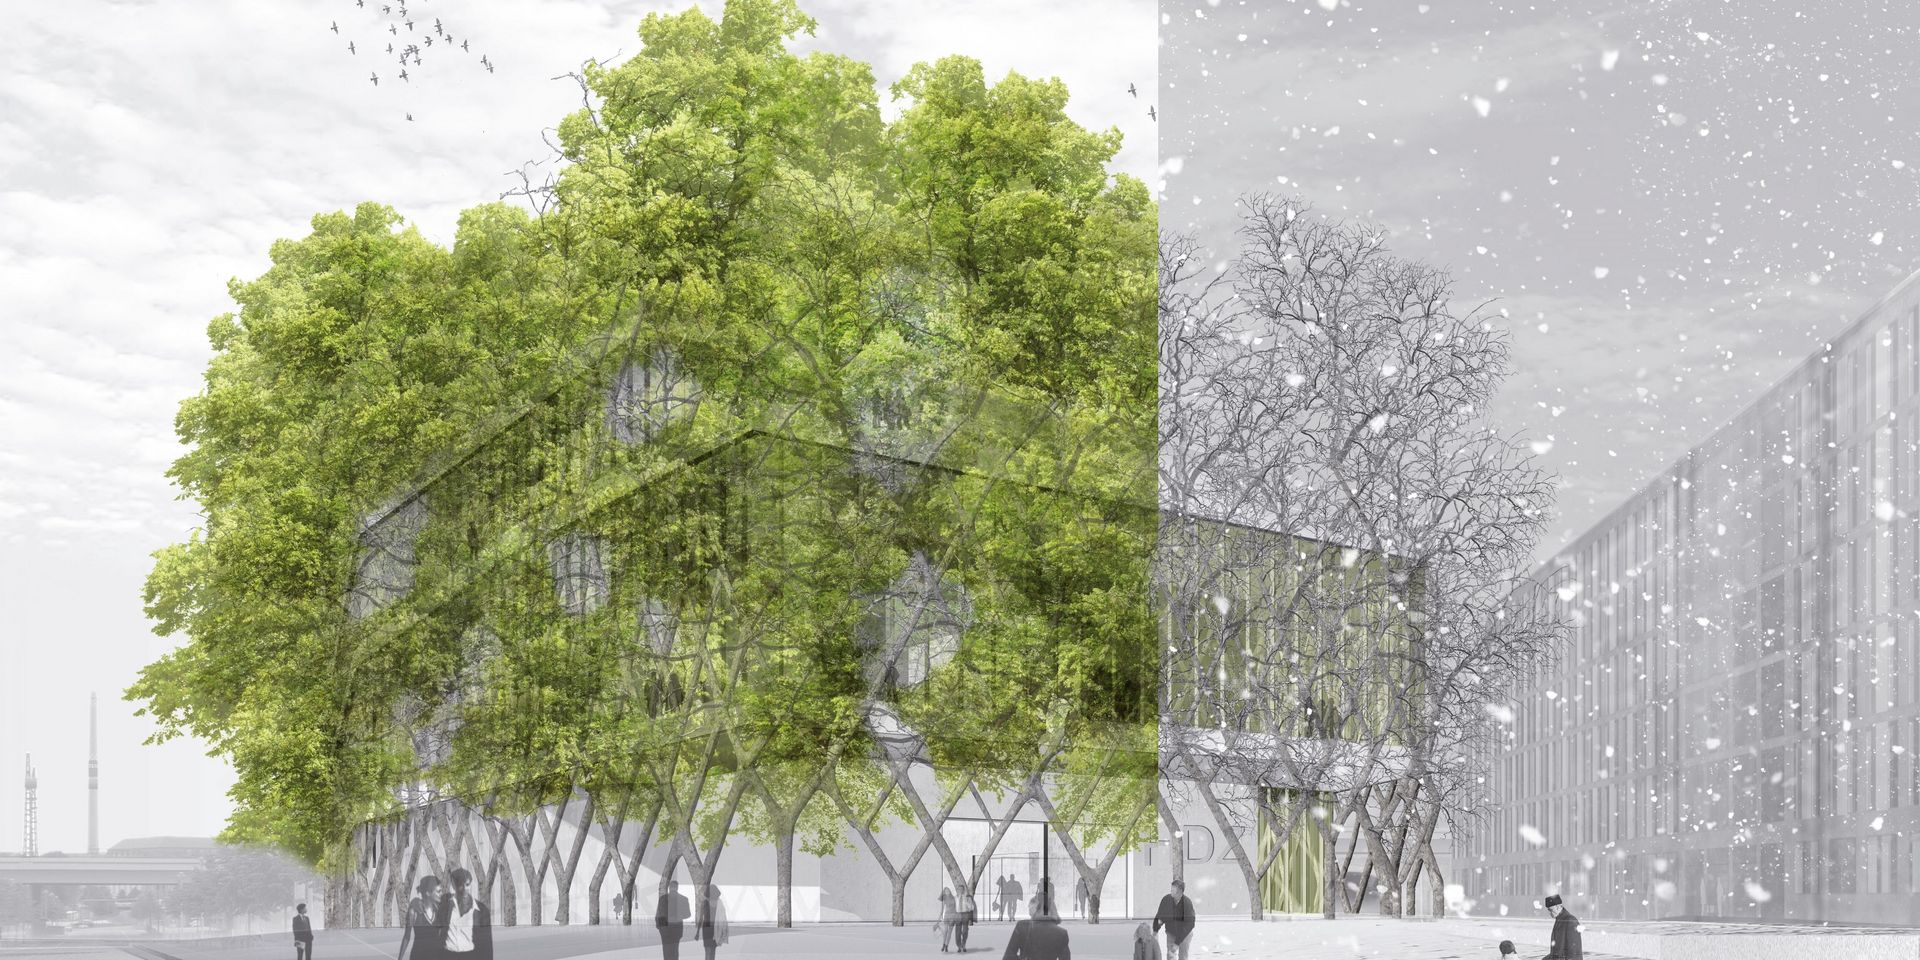 Digital model: The model shows an overgrown building whose two halves each represent a season, summer and winter. Small groups or individual people can be seen on the forecourt of the building.